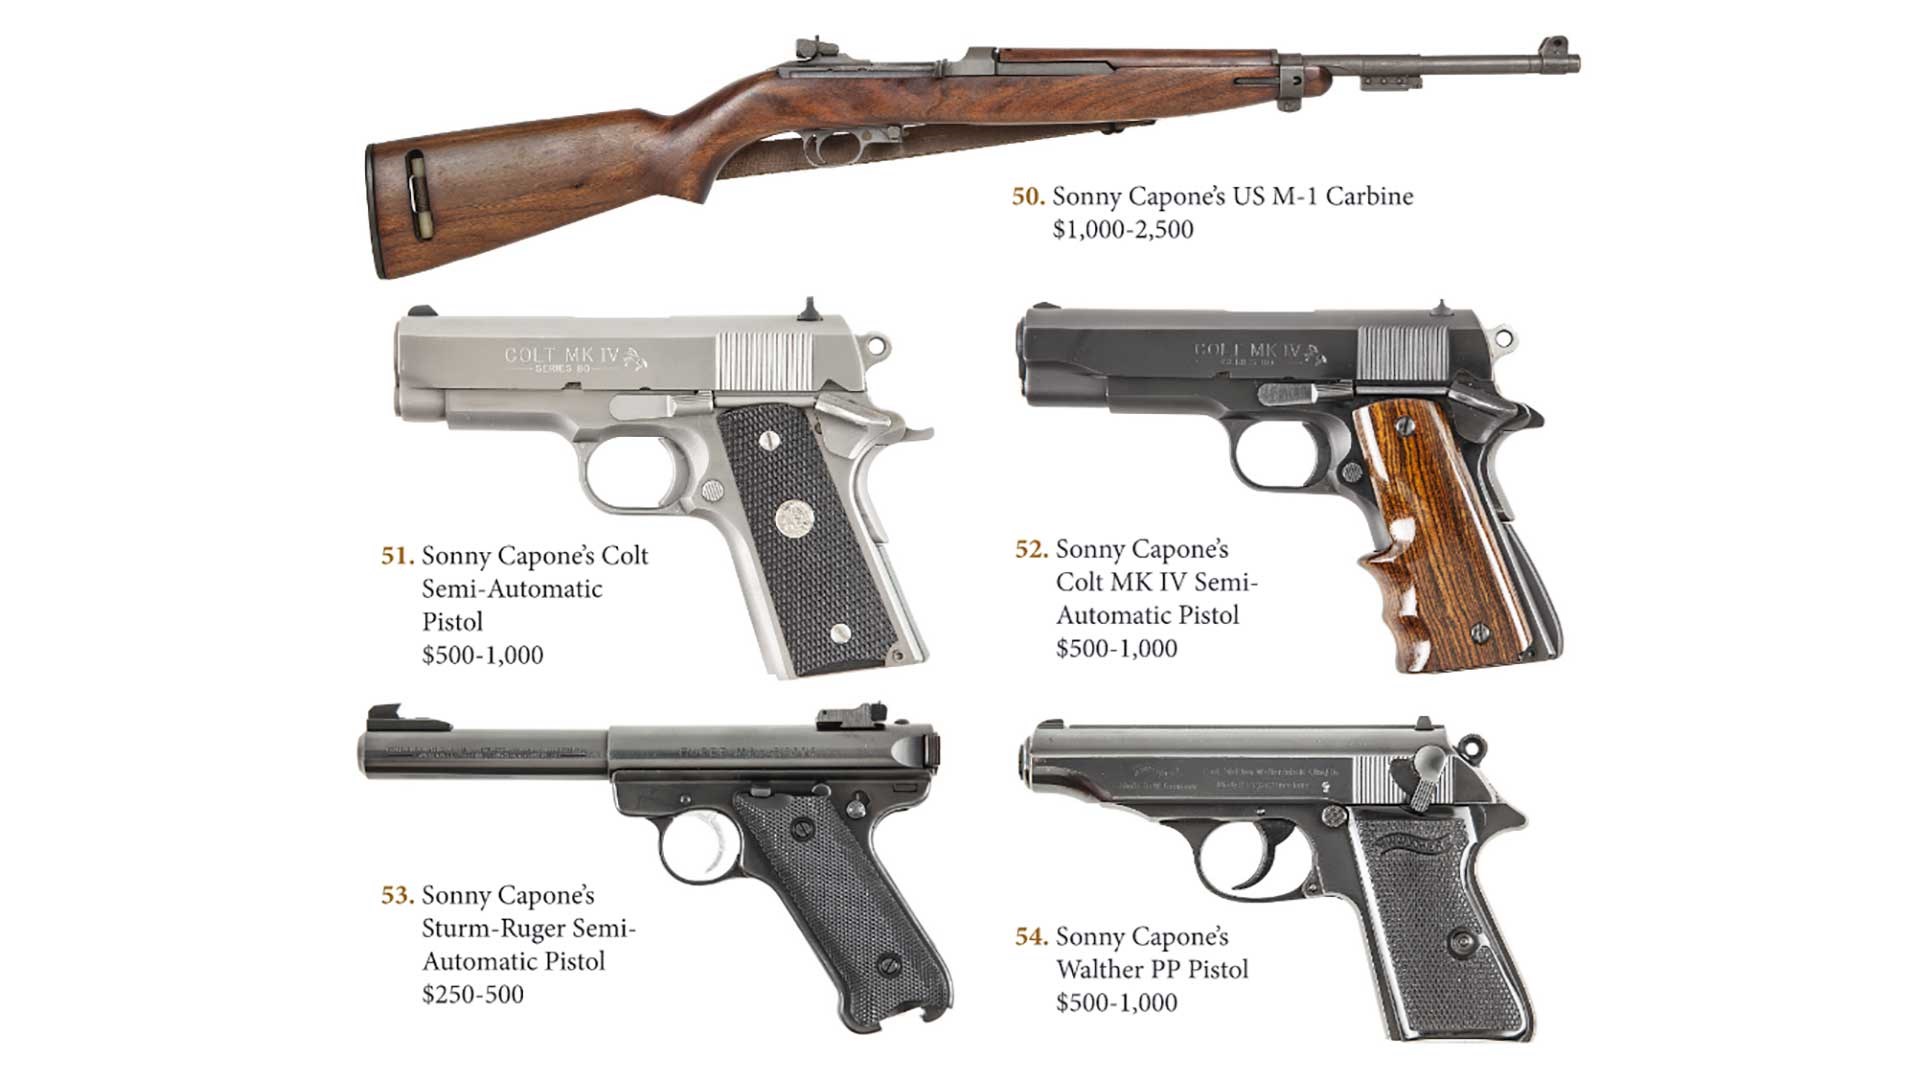 Several firearms owned by Sonny Capone shown on white, including an M1 Carbine, two 1911 pistols, a Walther PP and a Ruger pistol.